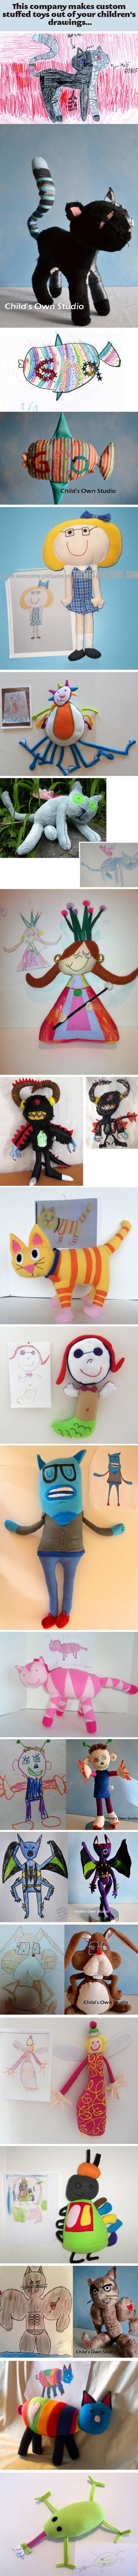 Custom stuffed toys from children's drawings.